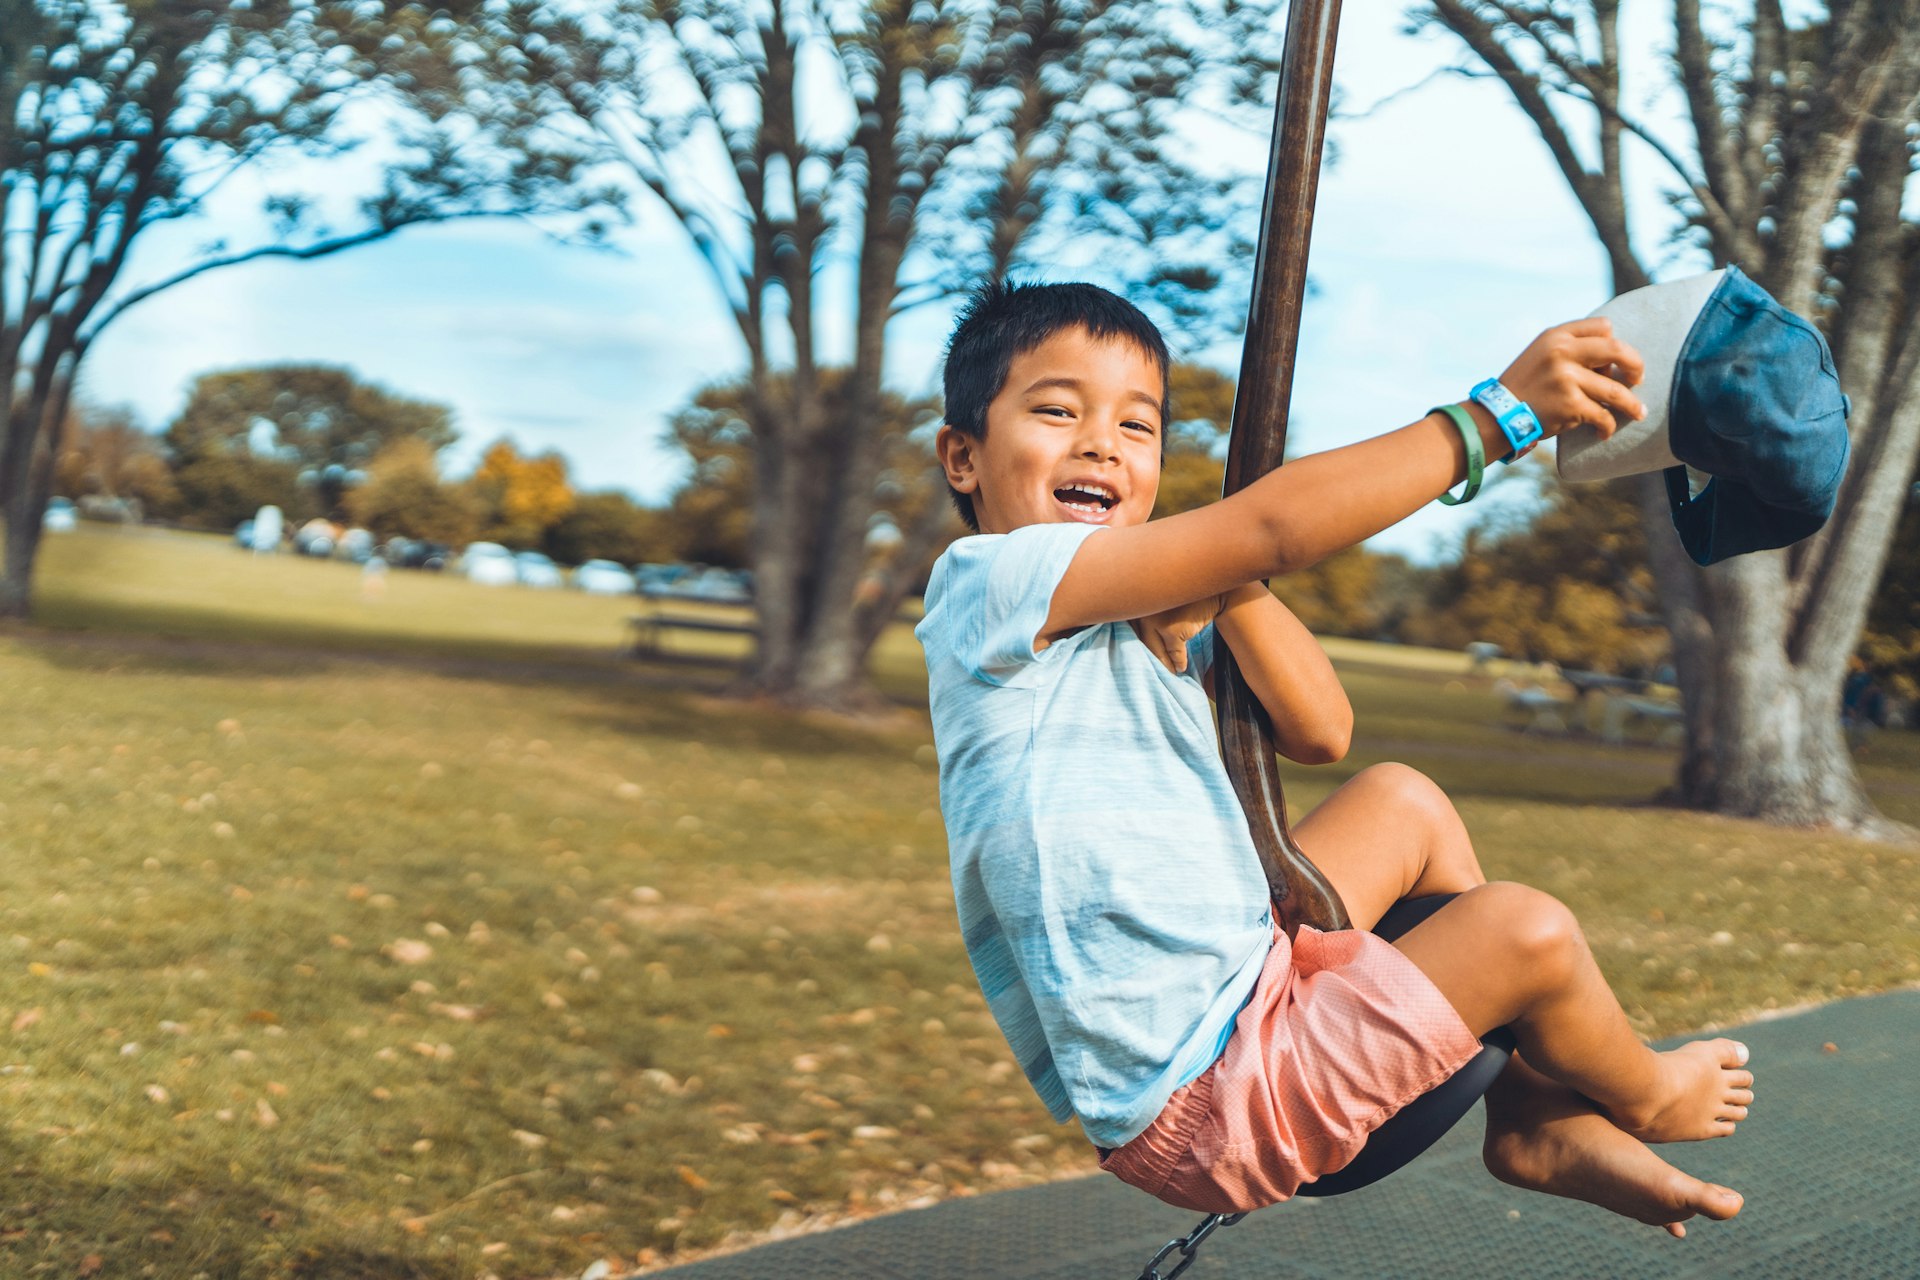 Kid smiling on a flying fox ride in an Auckland playground, New Zealand.